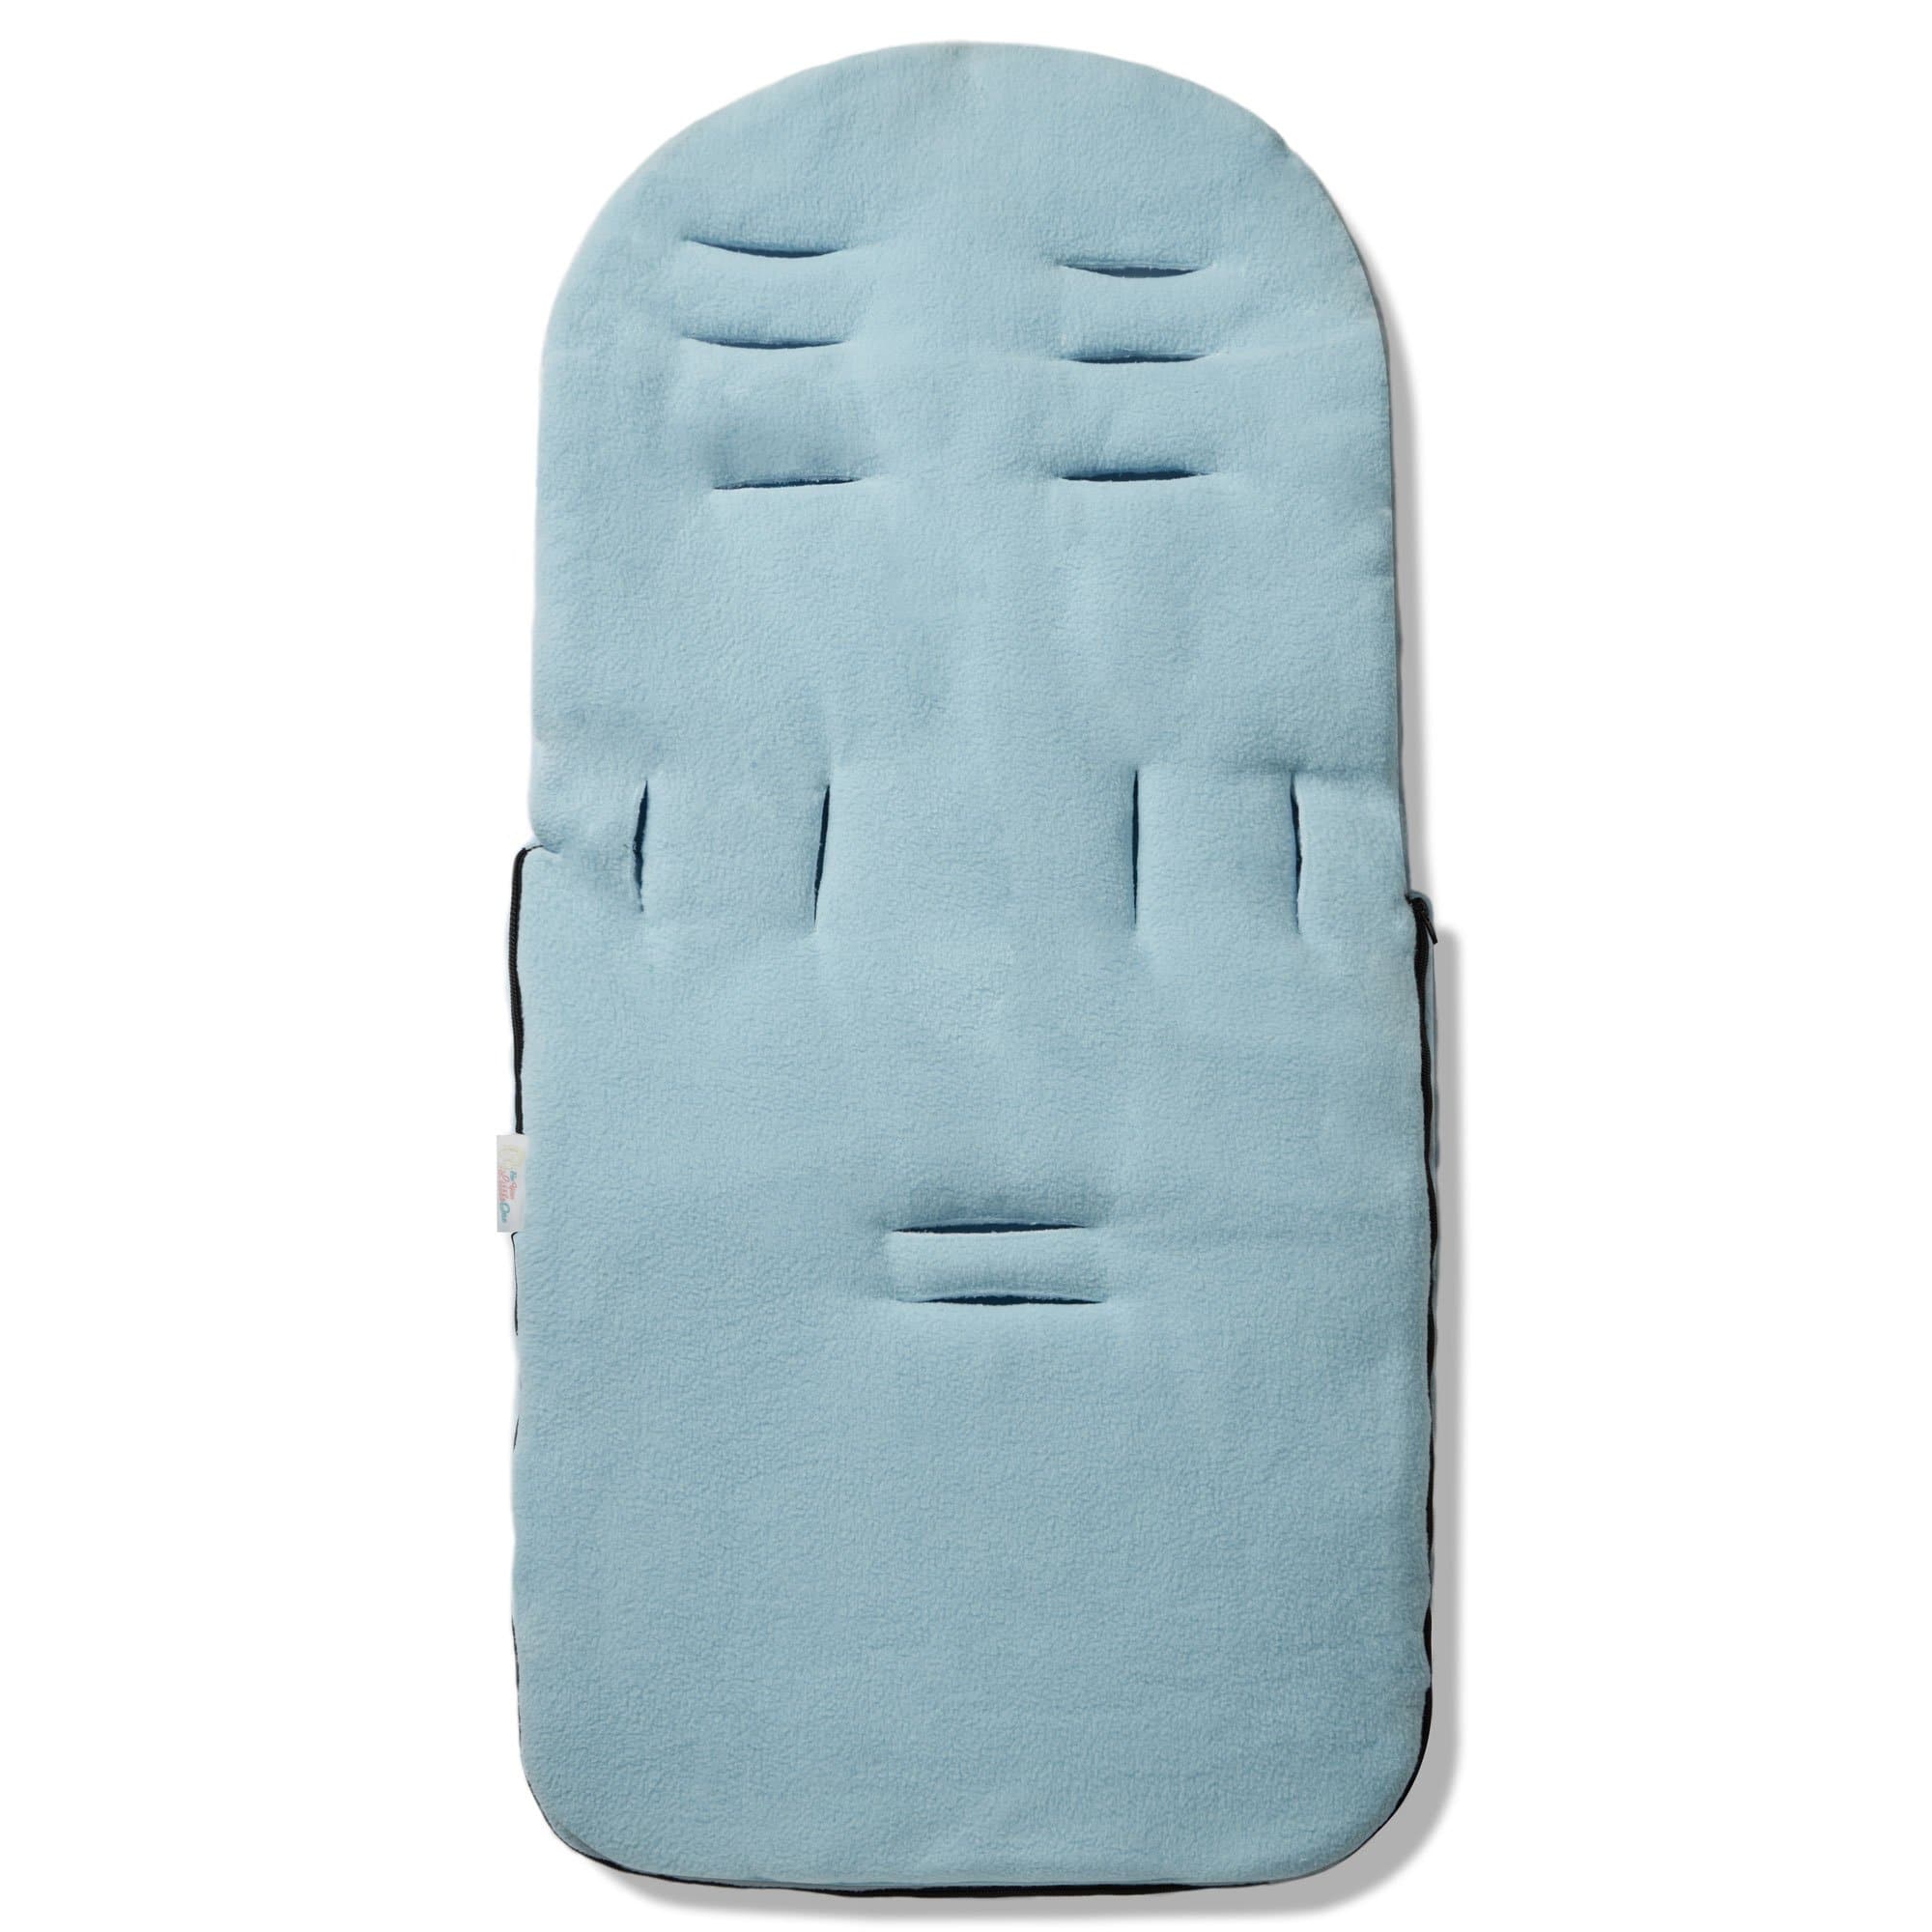 Dimple Footmuff / Cosy Toes Compatible with BabyDan - For Your Little One